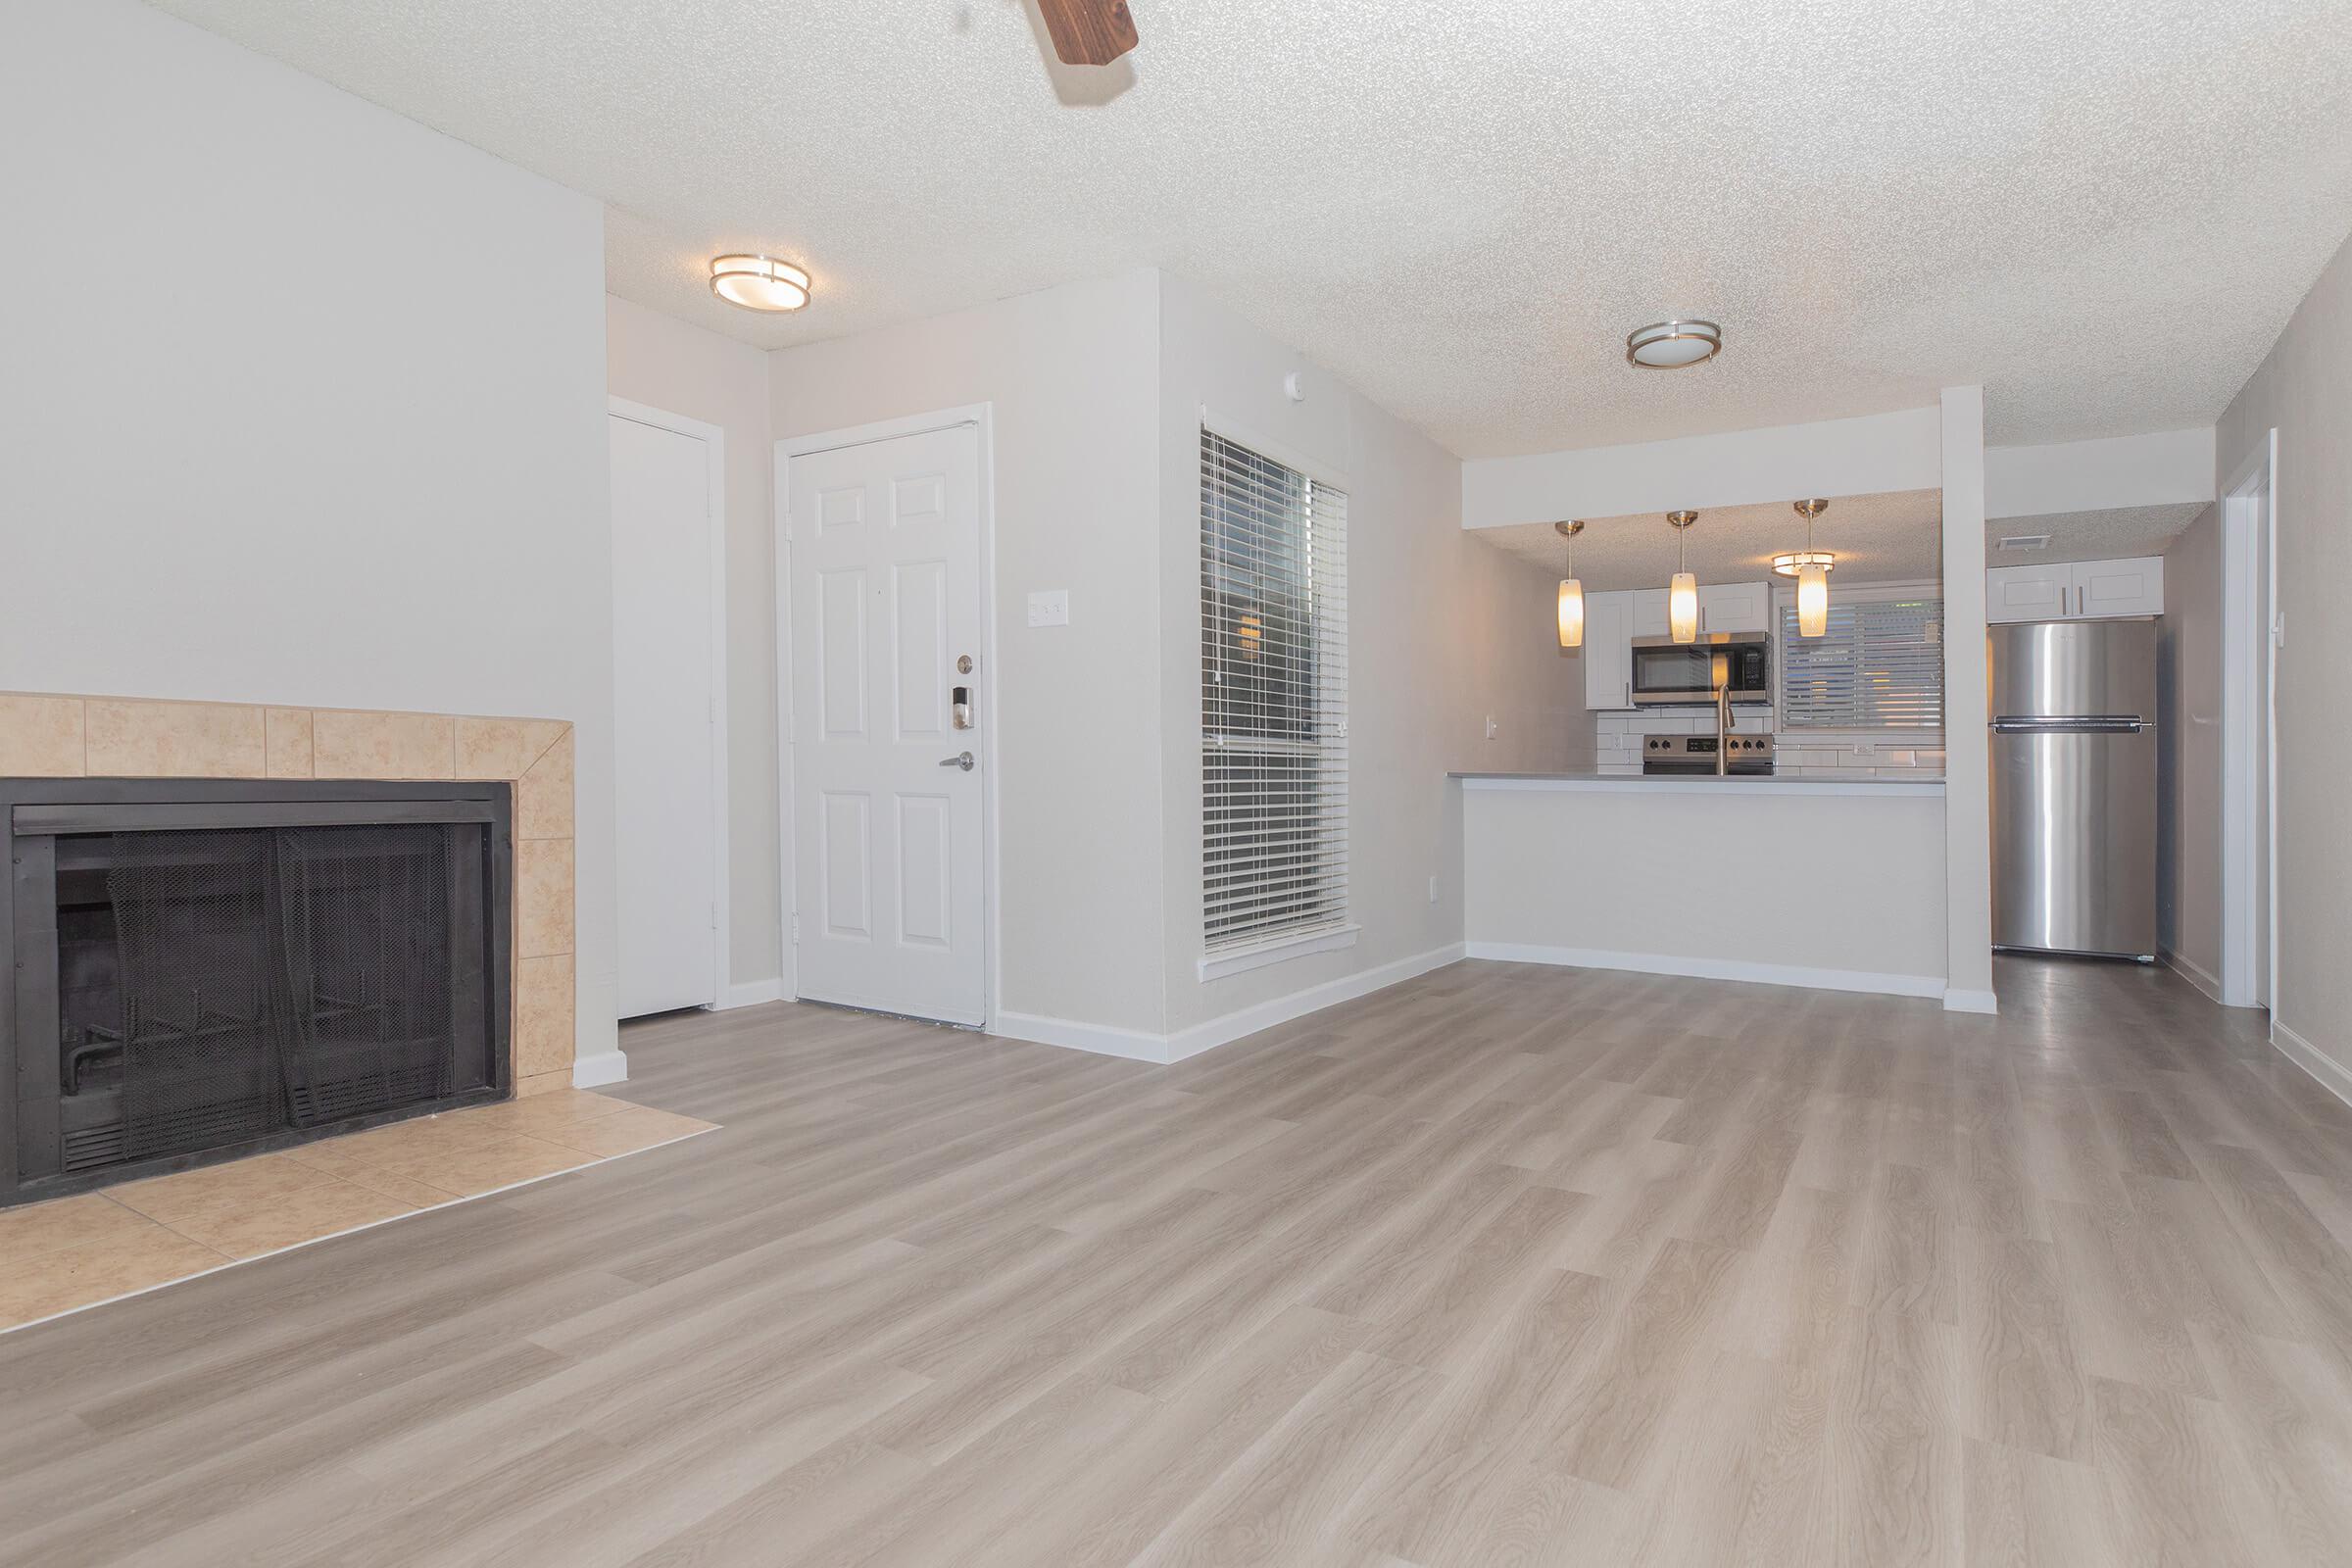 Spacious apartment with wood-style flooring at Tides on Green Oaks in Arlington, Texas